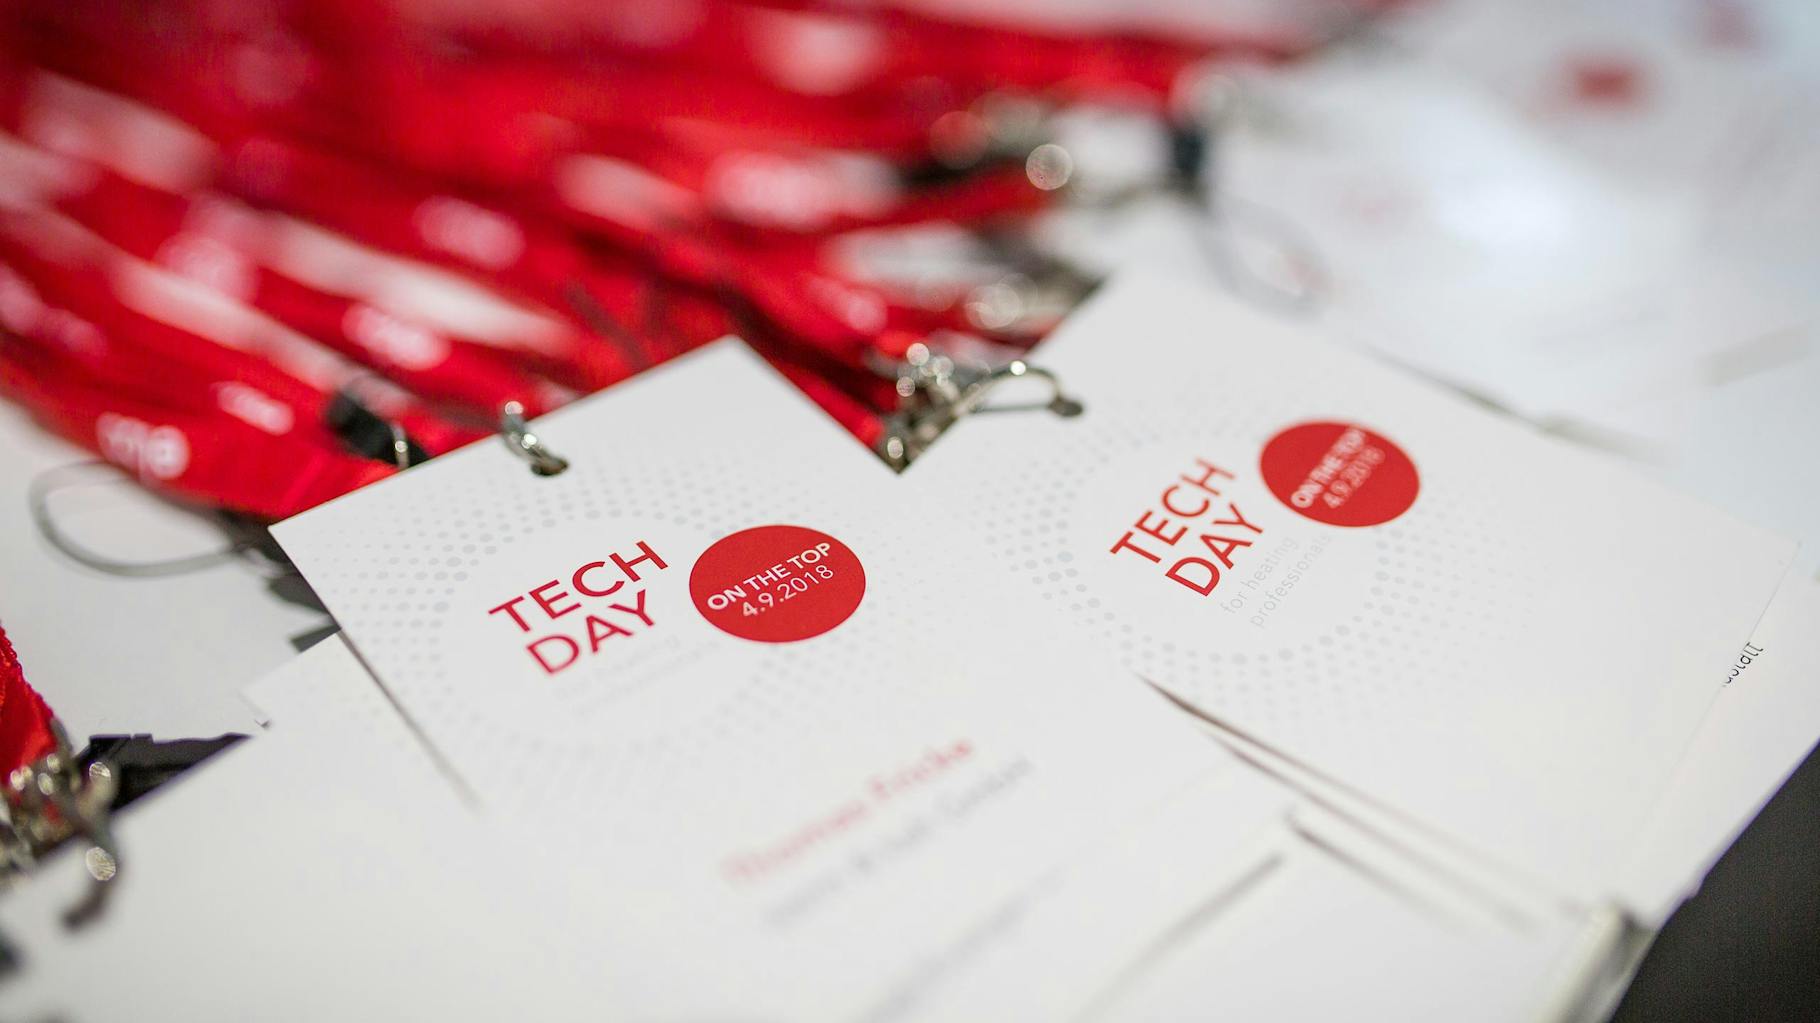 Name badges for the ELCO Tech Day